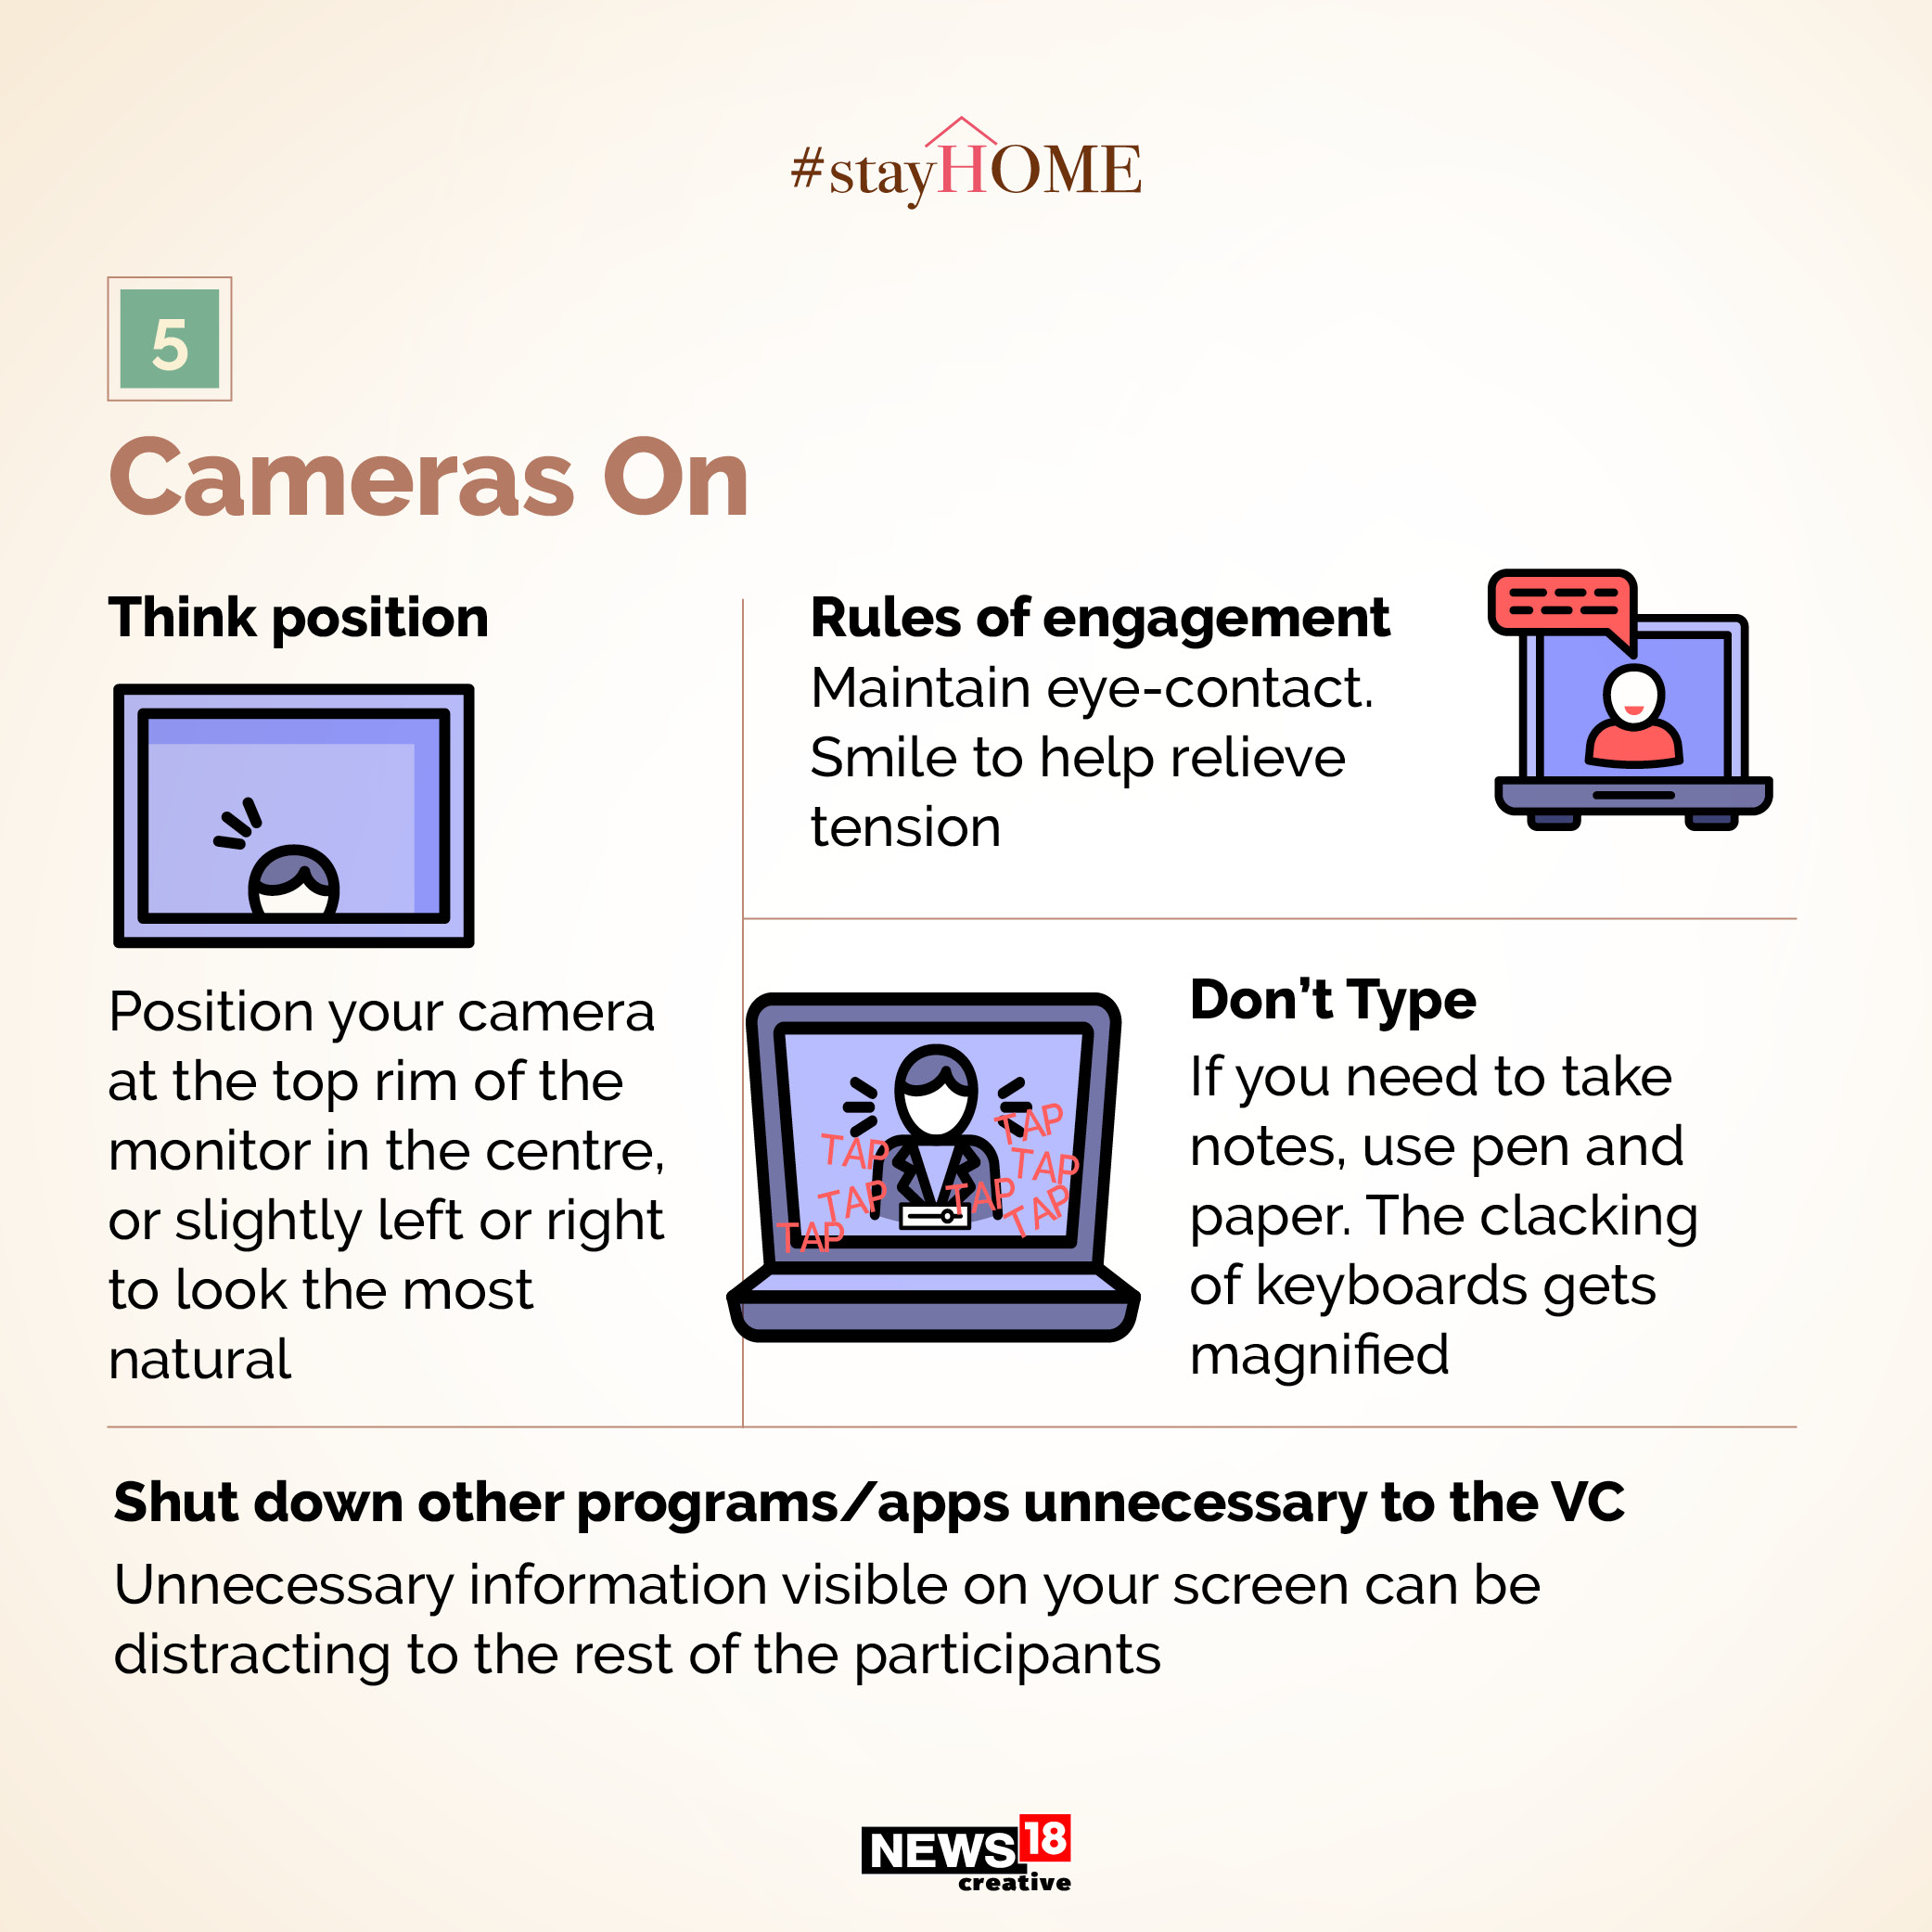 Simple ways to do that video conference right